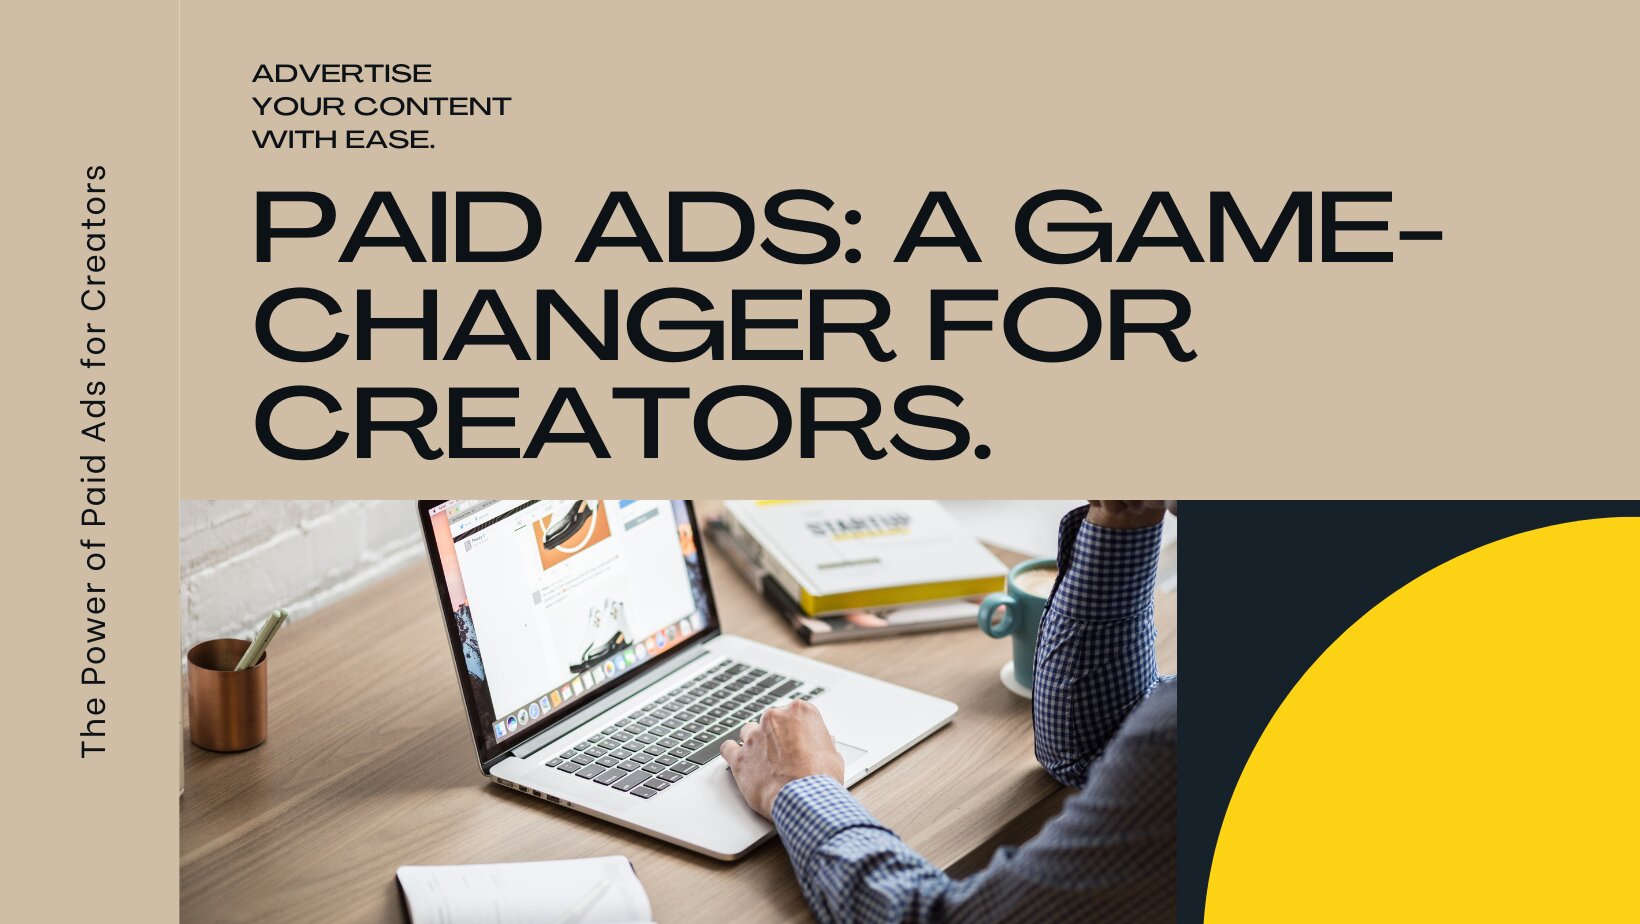 How to Promote Your Services as a Creator with Paid Ads